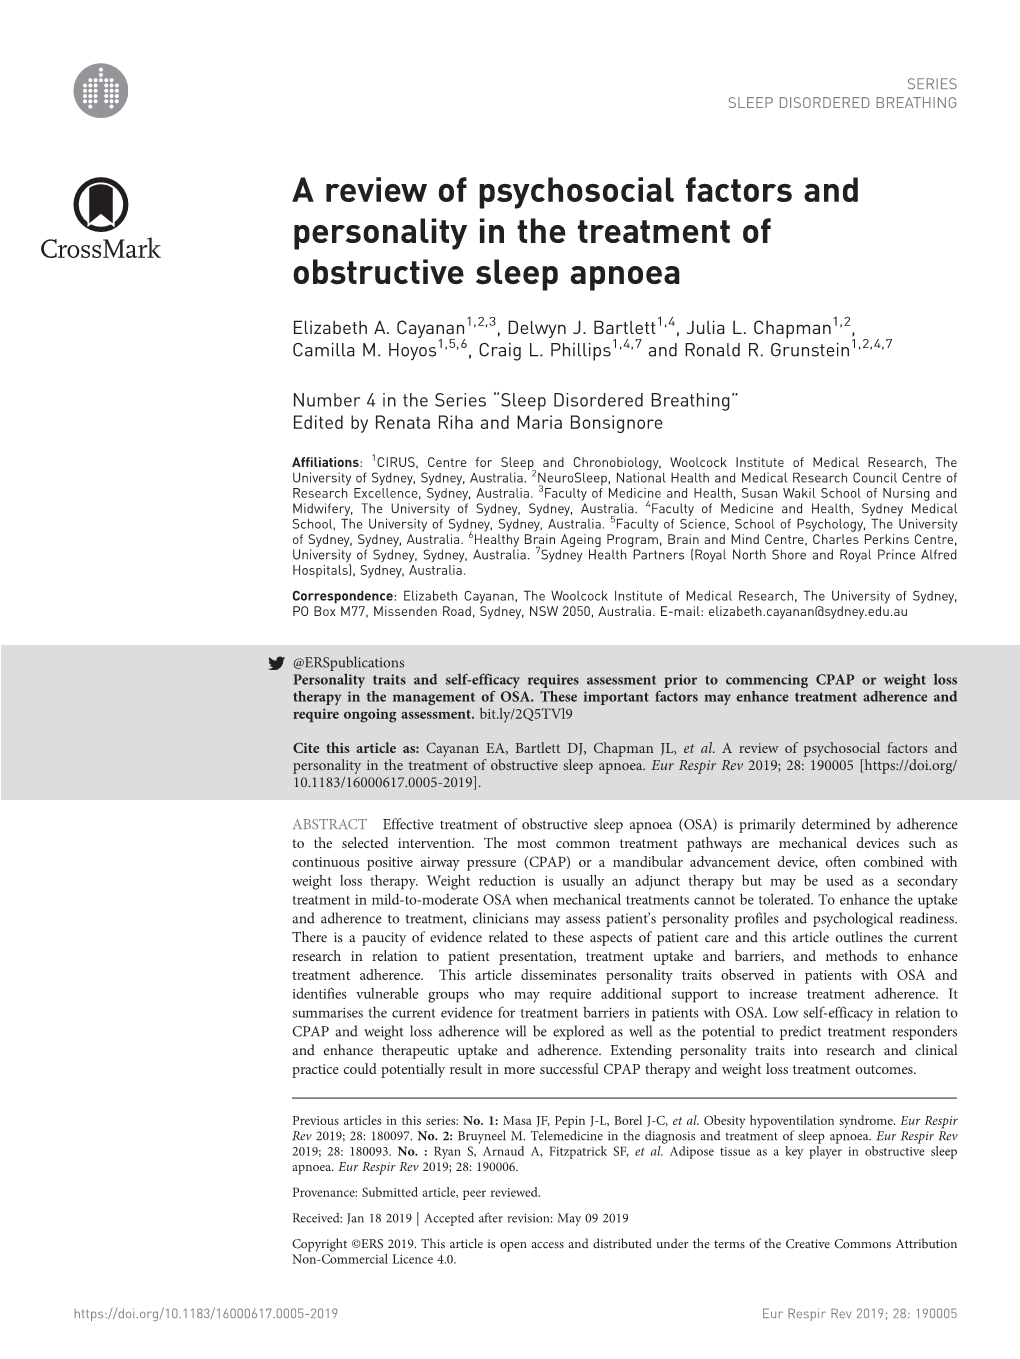 A Review of Psychosocial Factors and Personality in the Treatment of Obstructive Sleep Apnoea